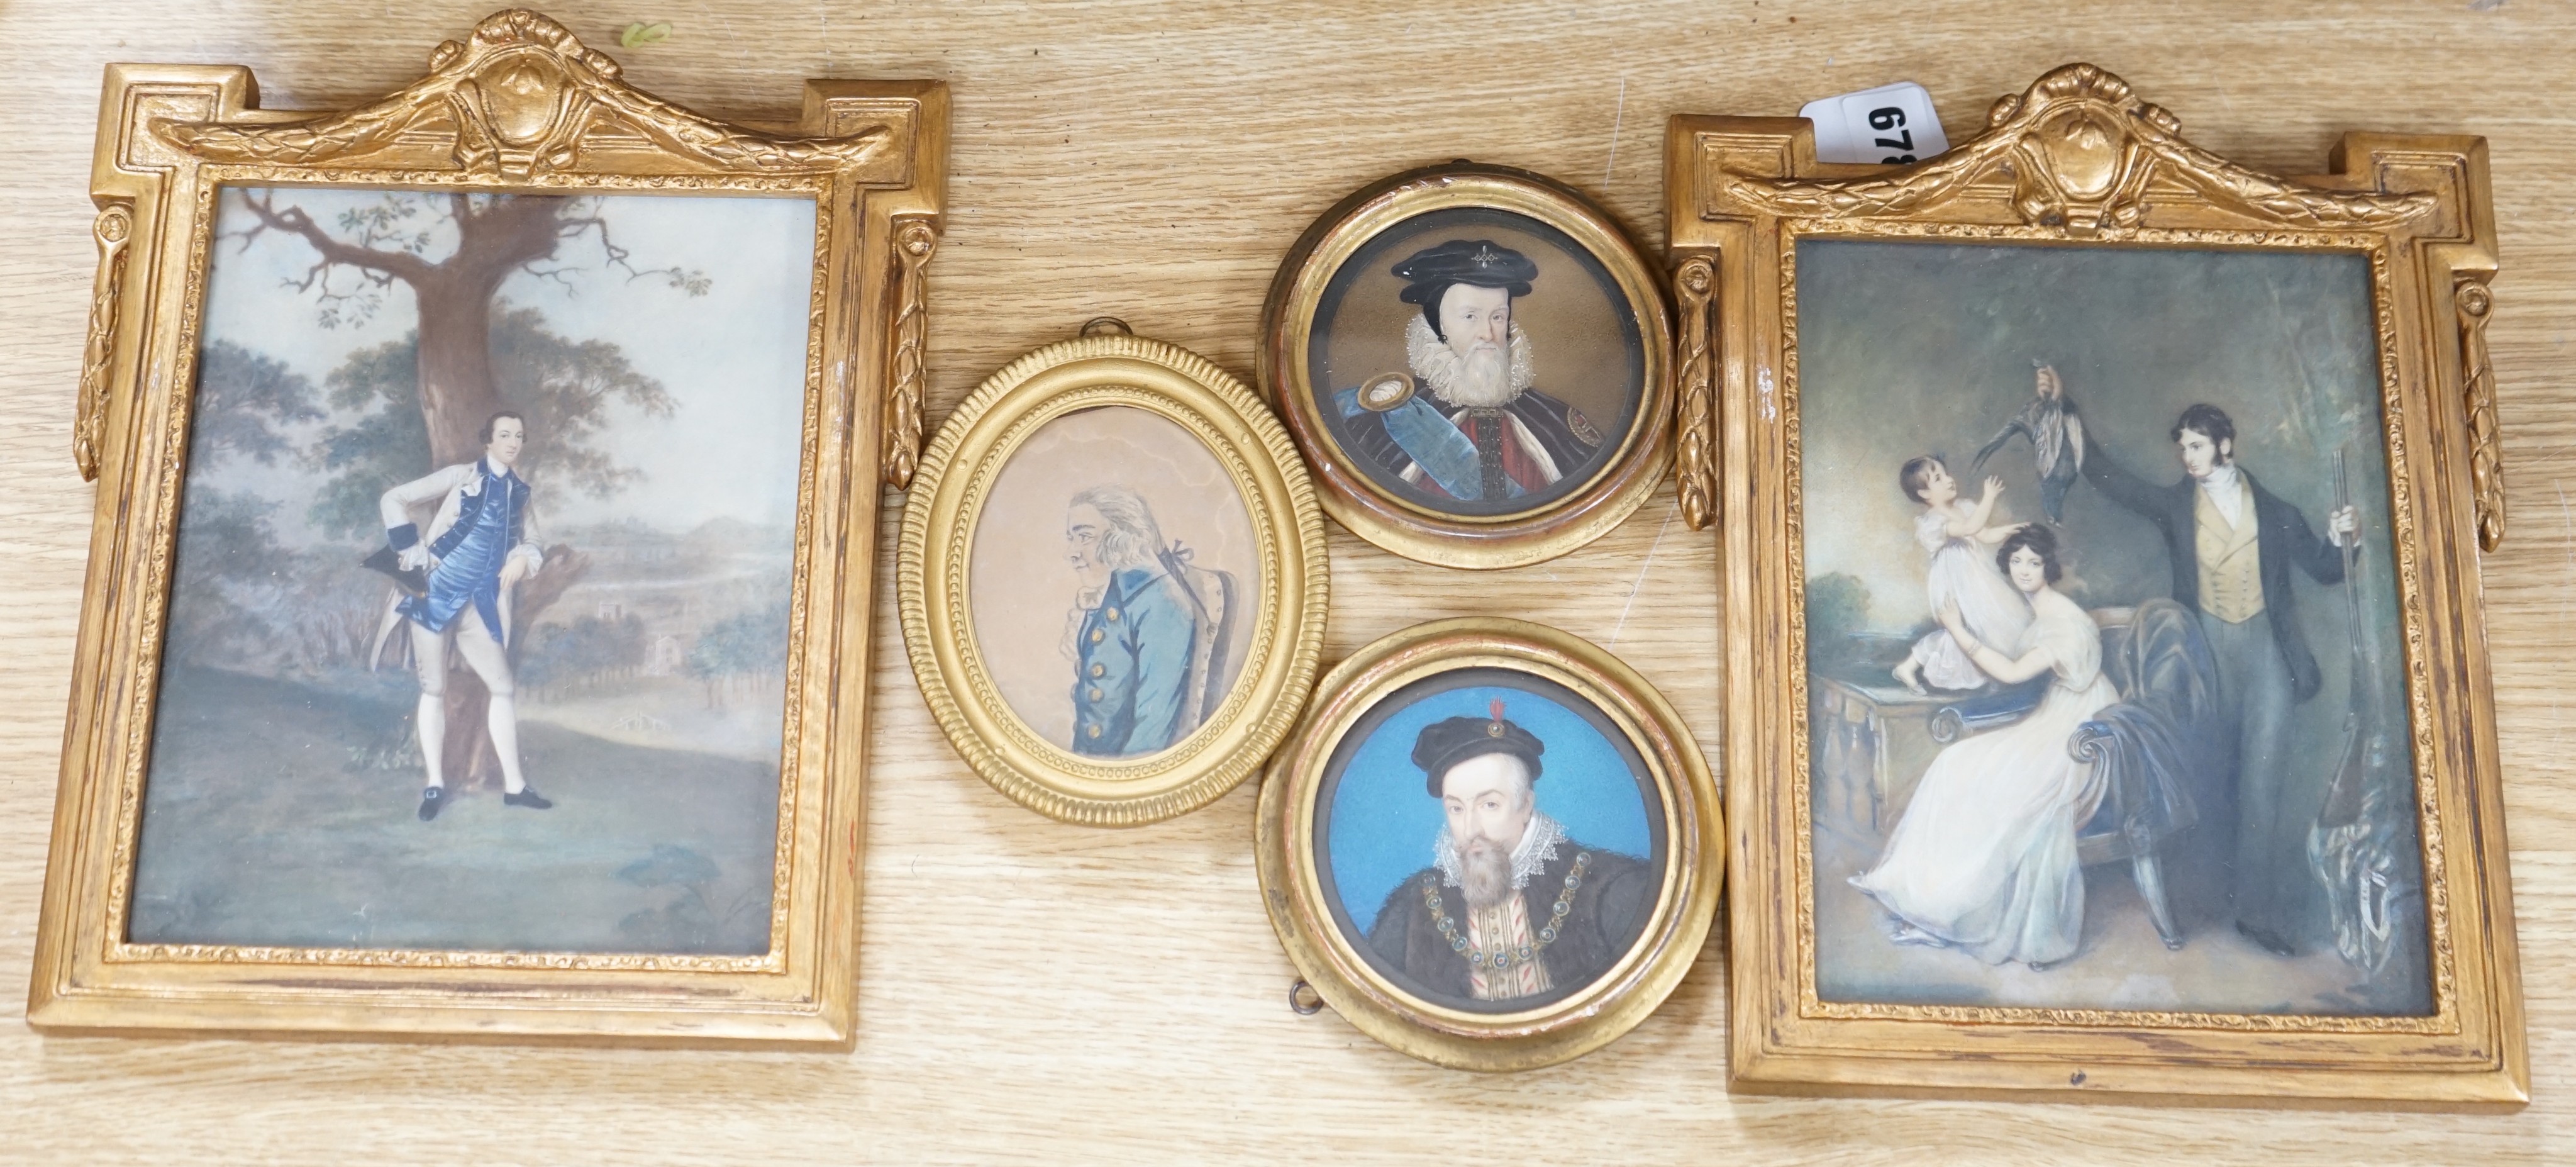 English School c.1900, pair of watercolour on card miniatures, Portraits of Robert Dudley, Earl of